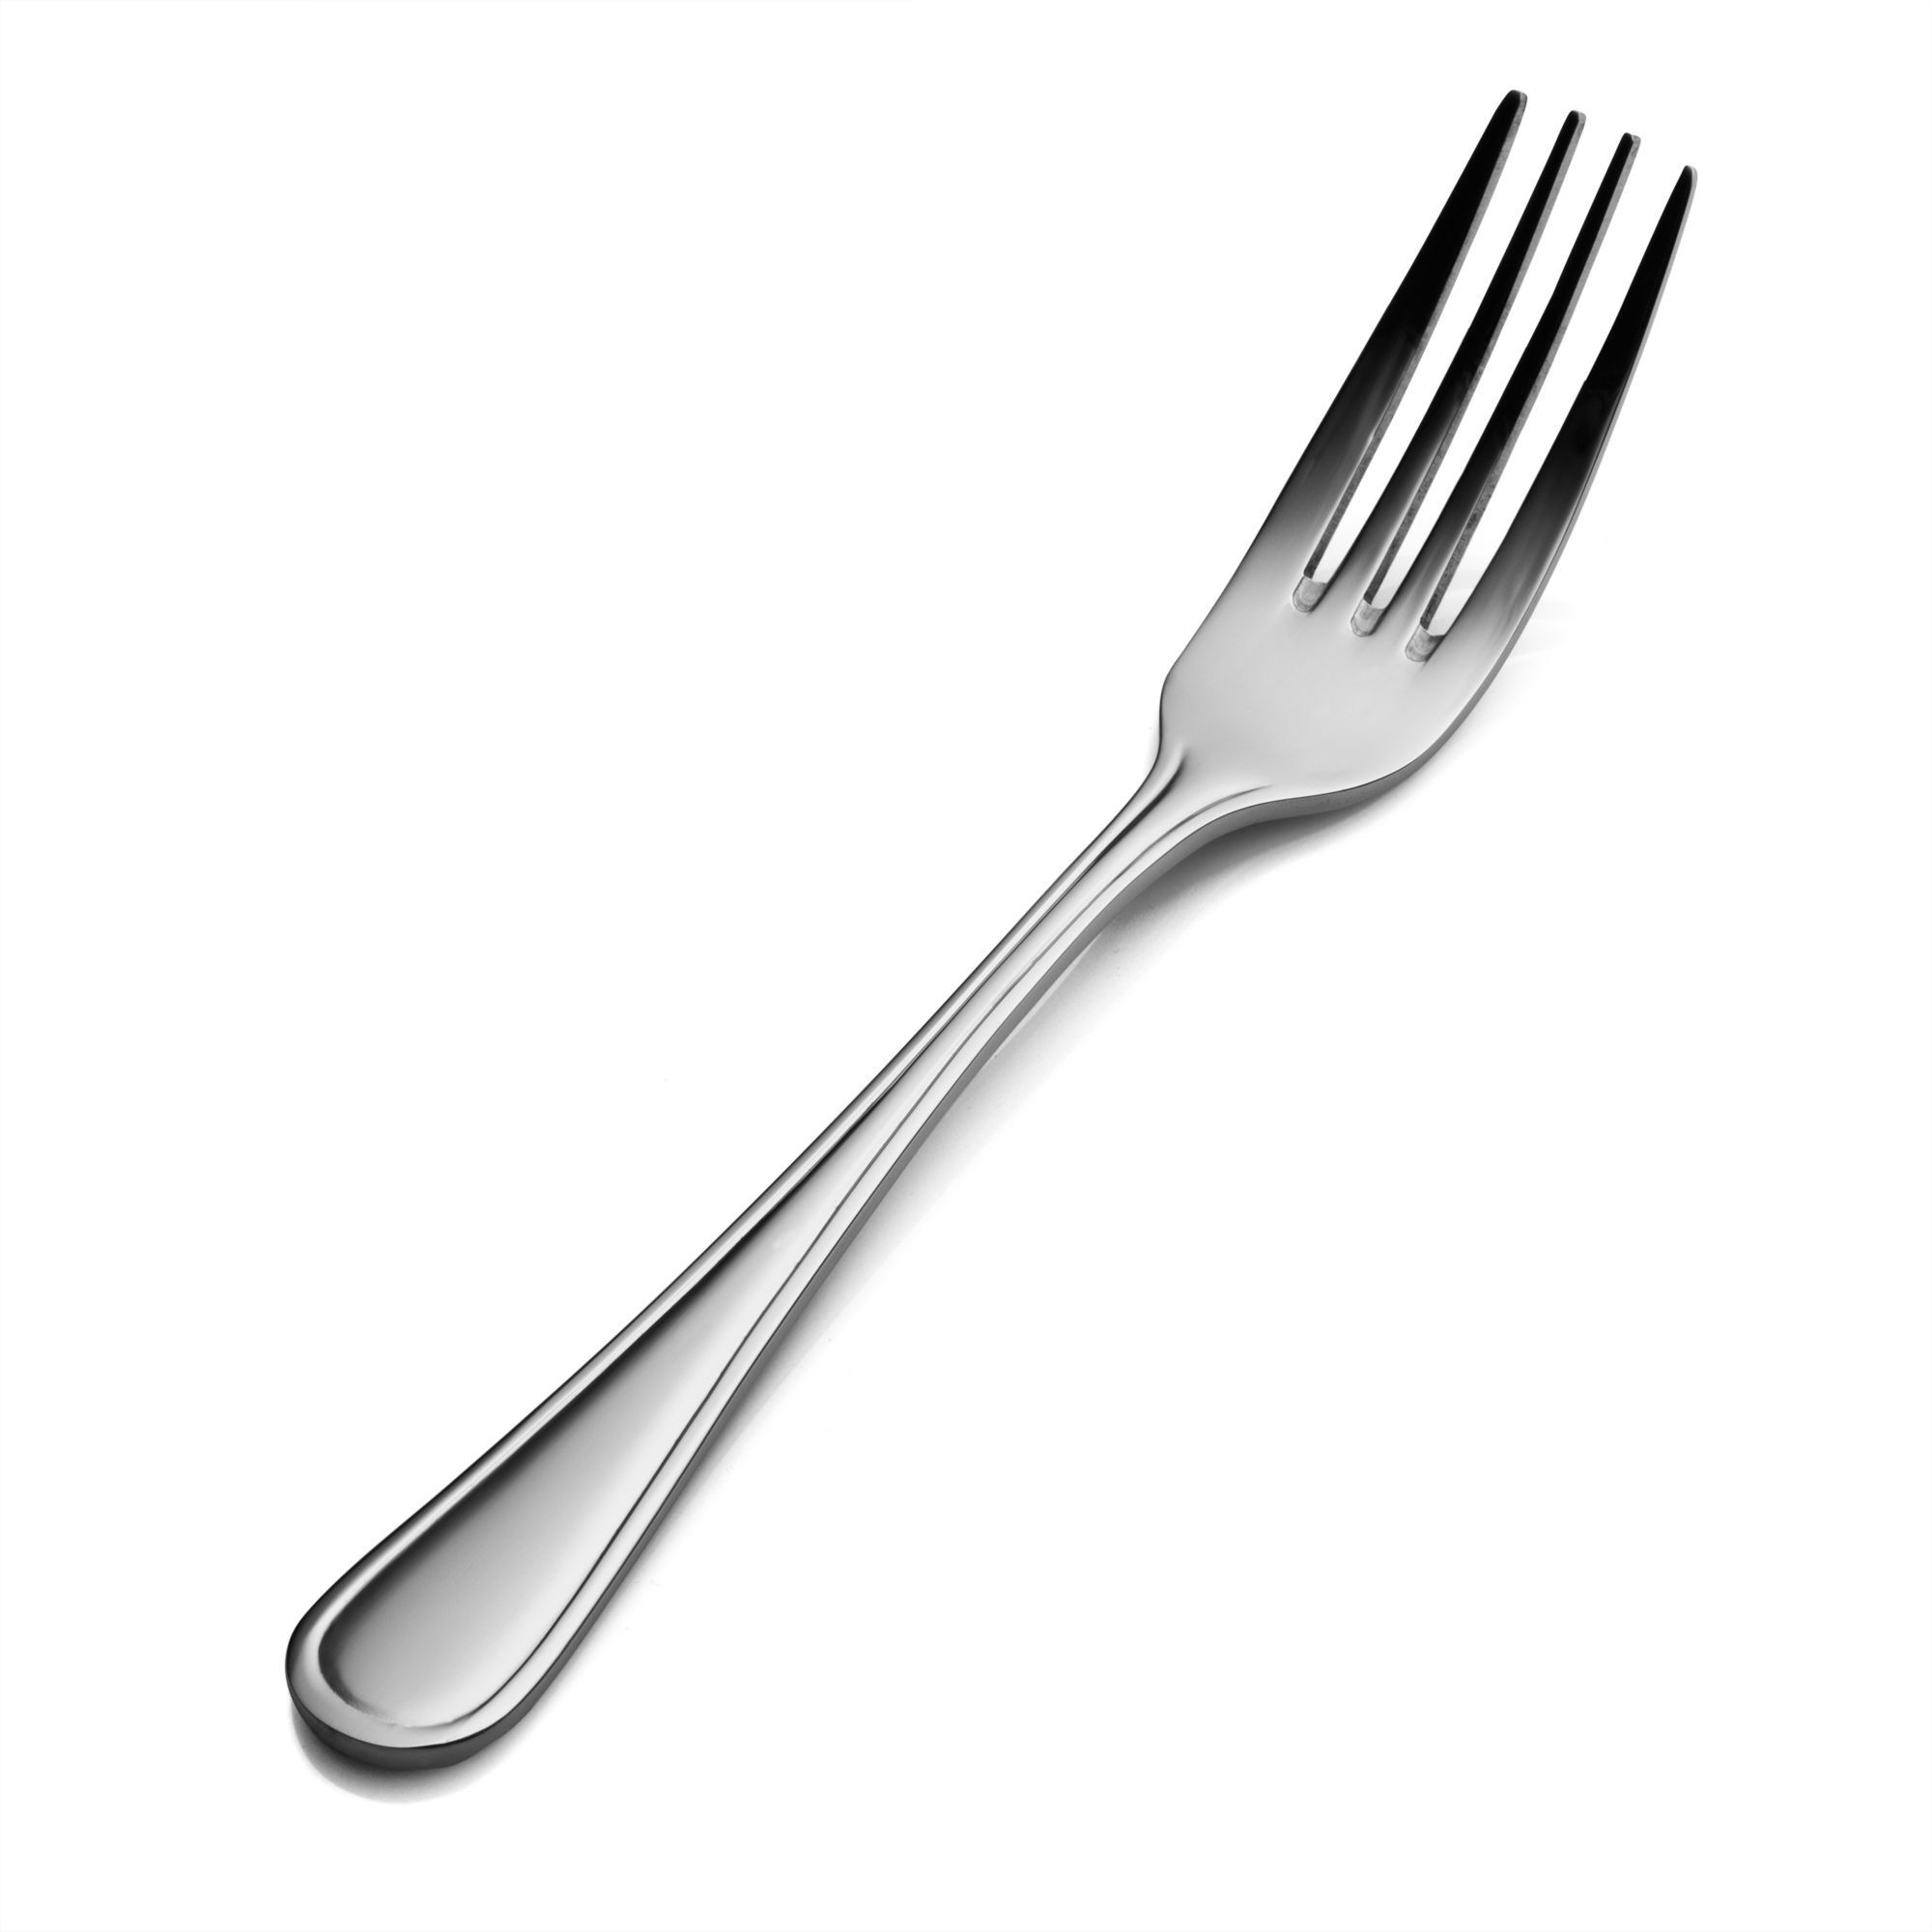 Bon Chef S306S Tuscany 18/8 Stainless Steel Silverplated European Dinner Fork